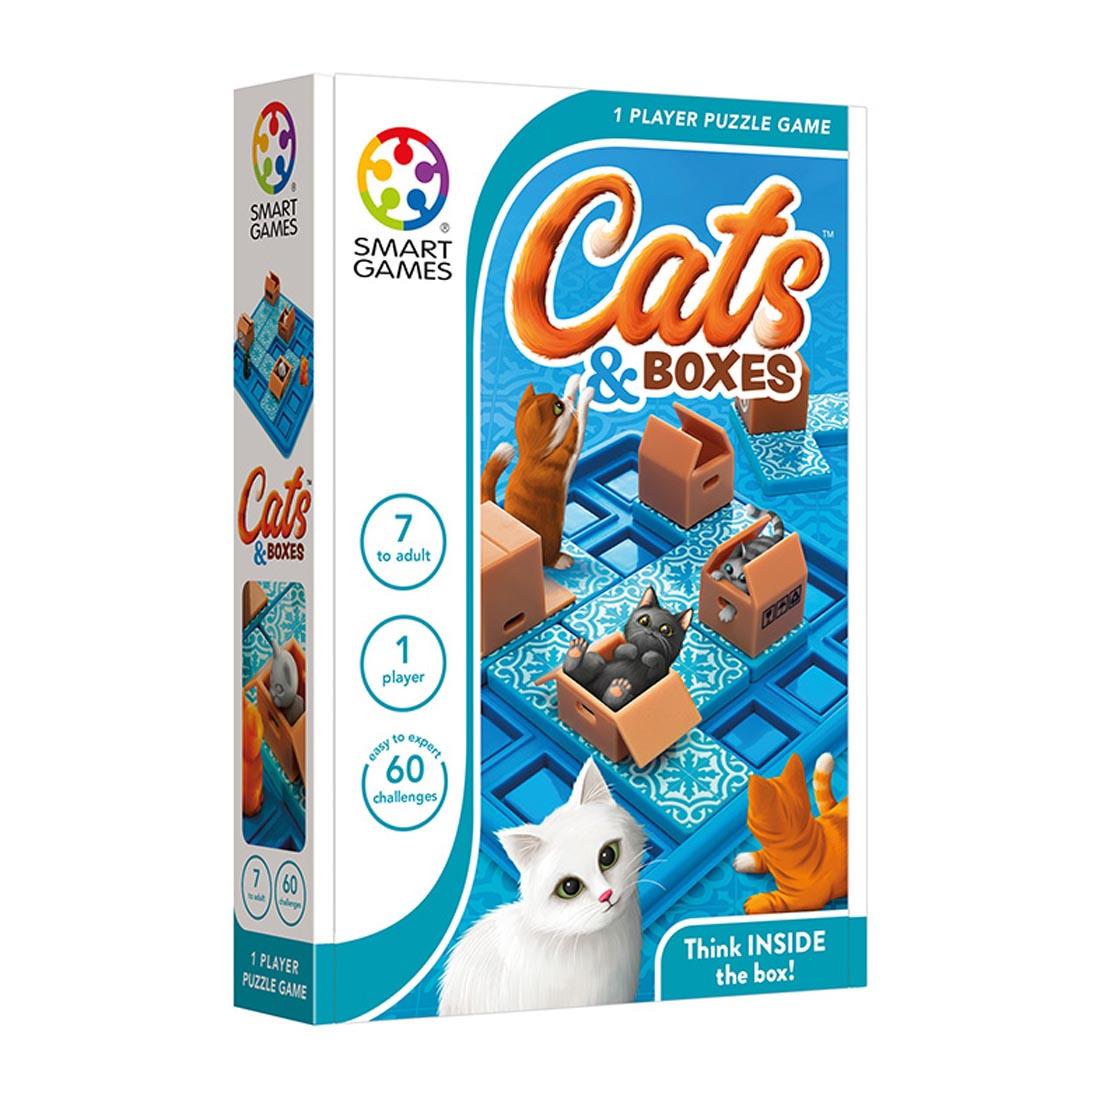 package for Cats & Boxes Game by Smart Games